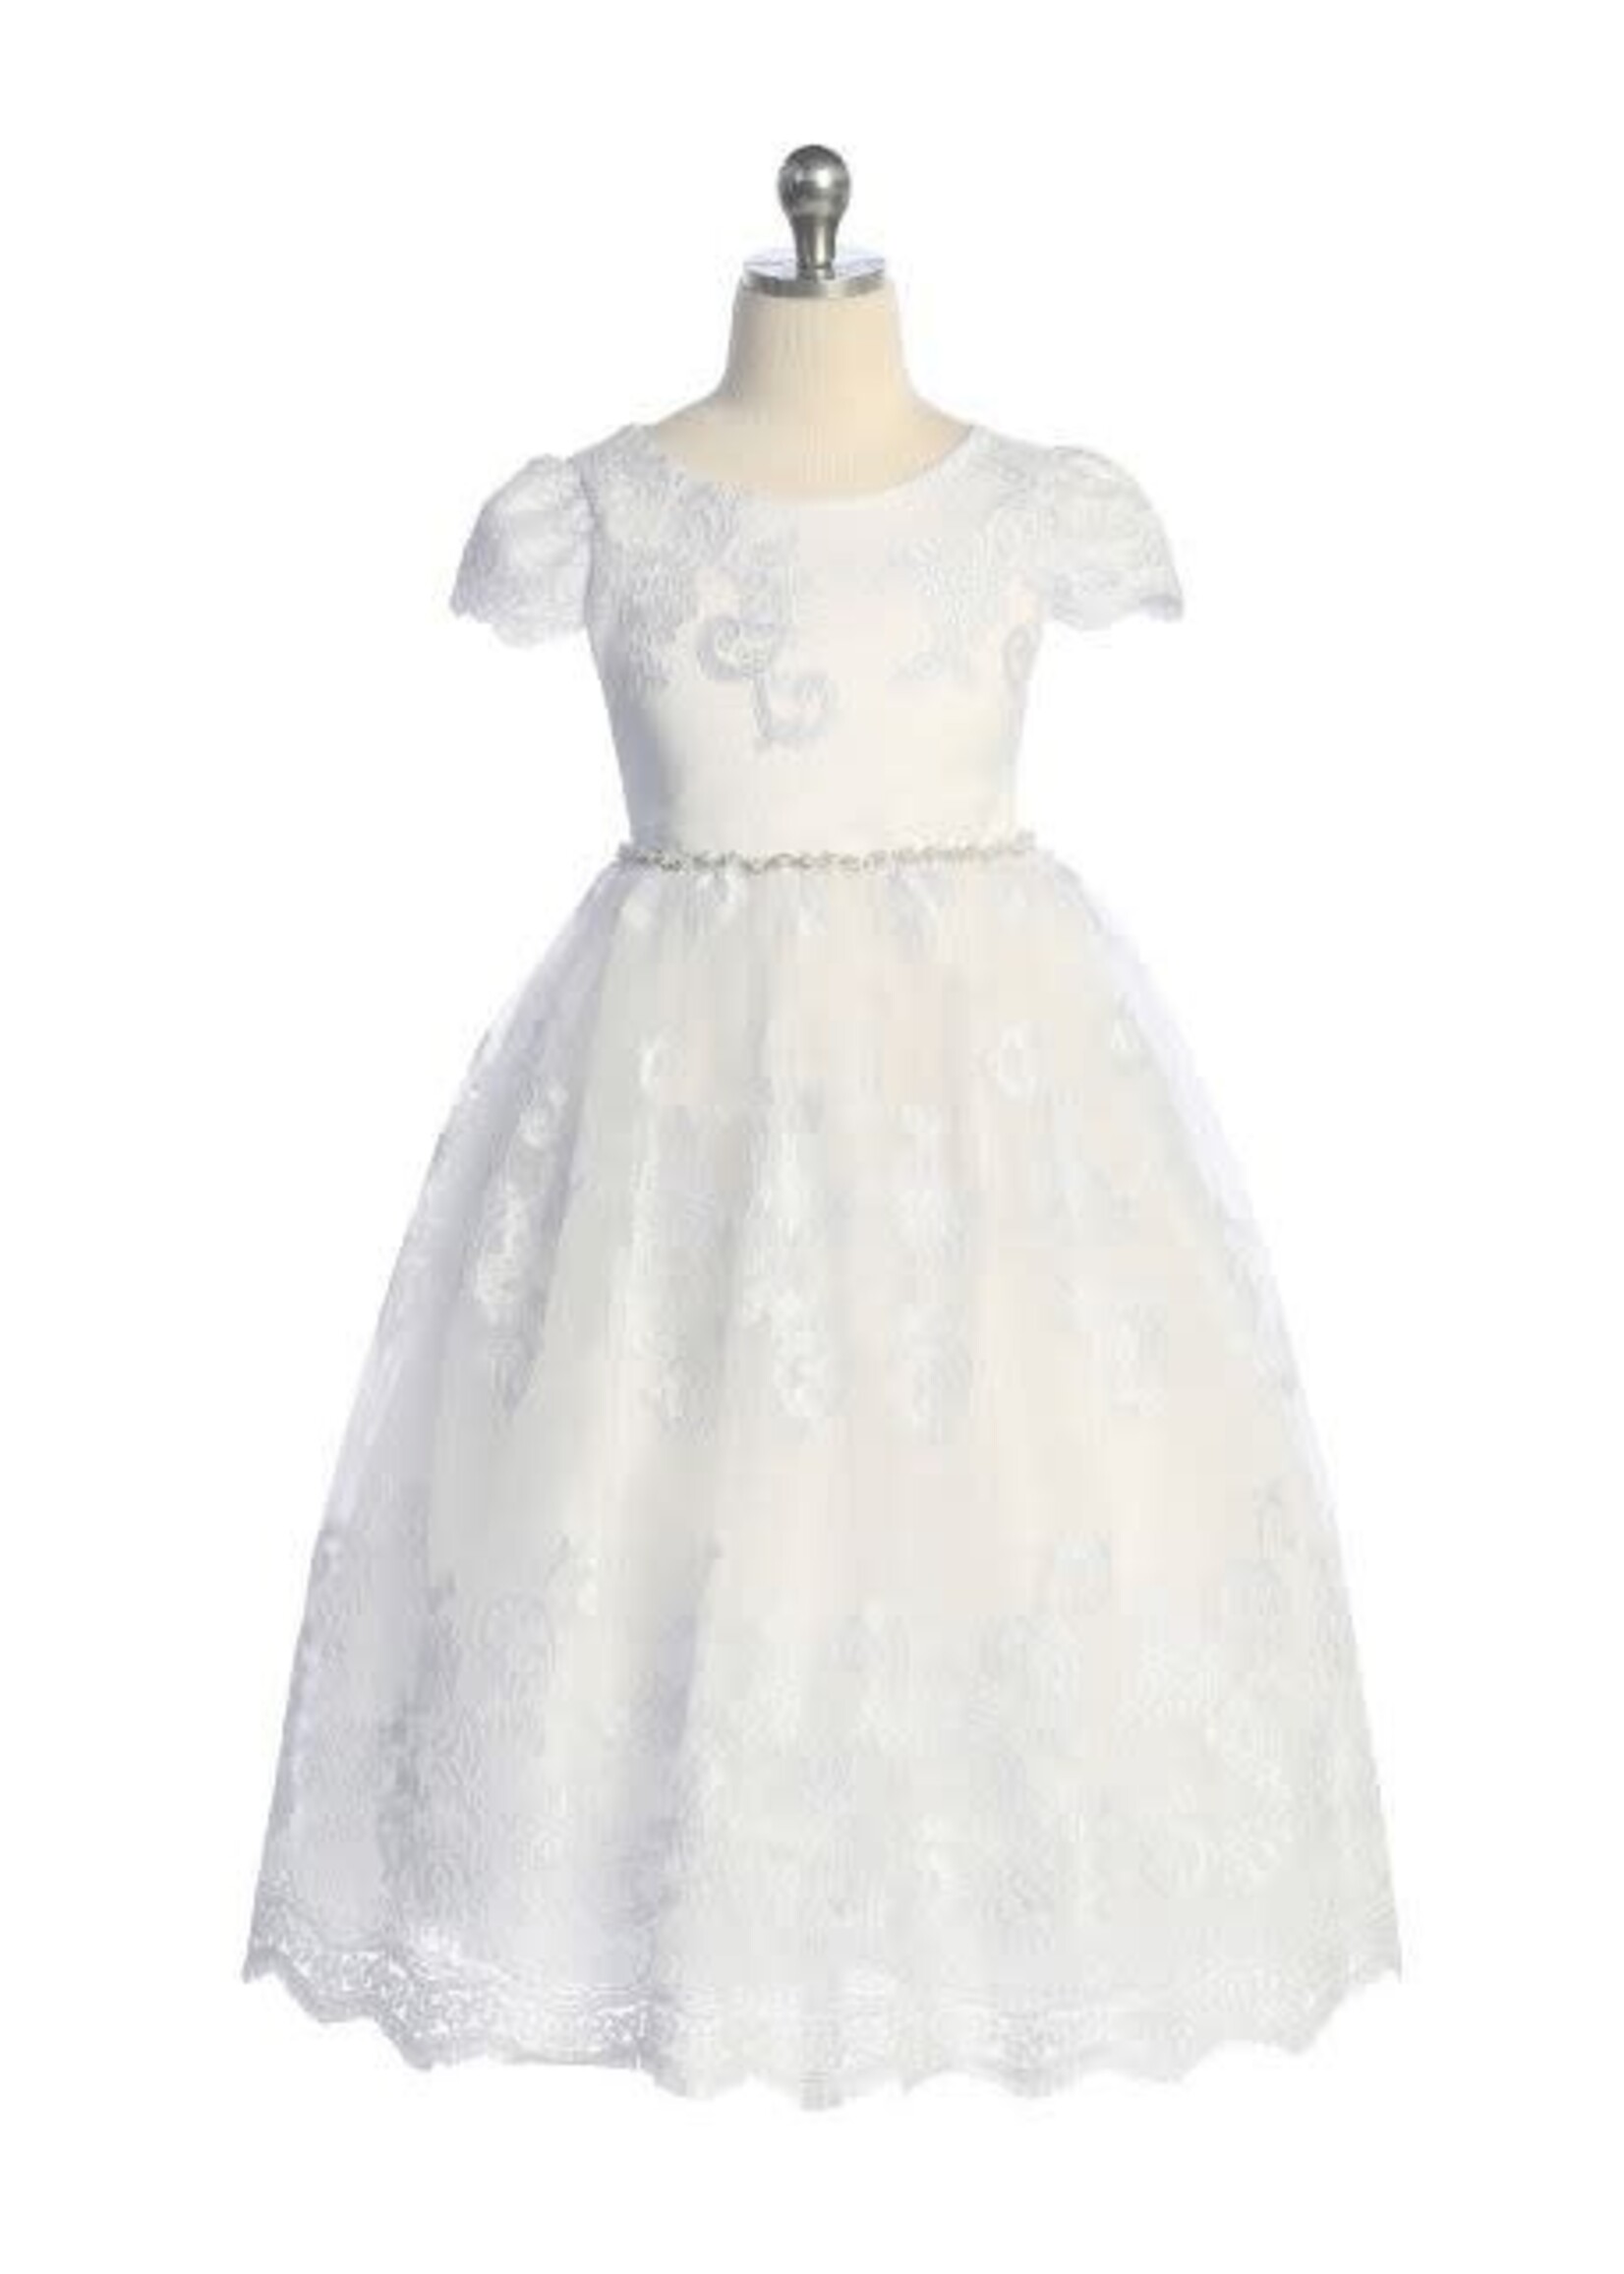 KD554 -  FIRST HOLY COMMUNION GOWN /FLOWER GIRL